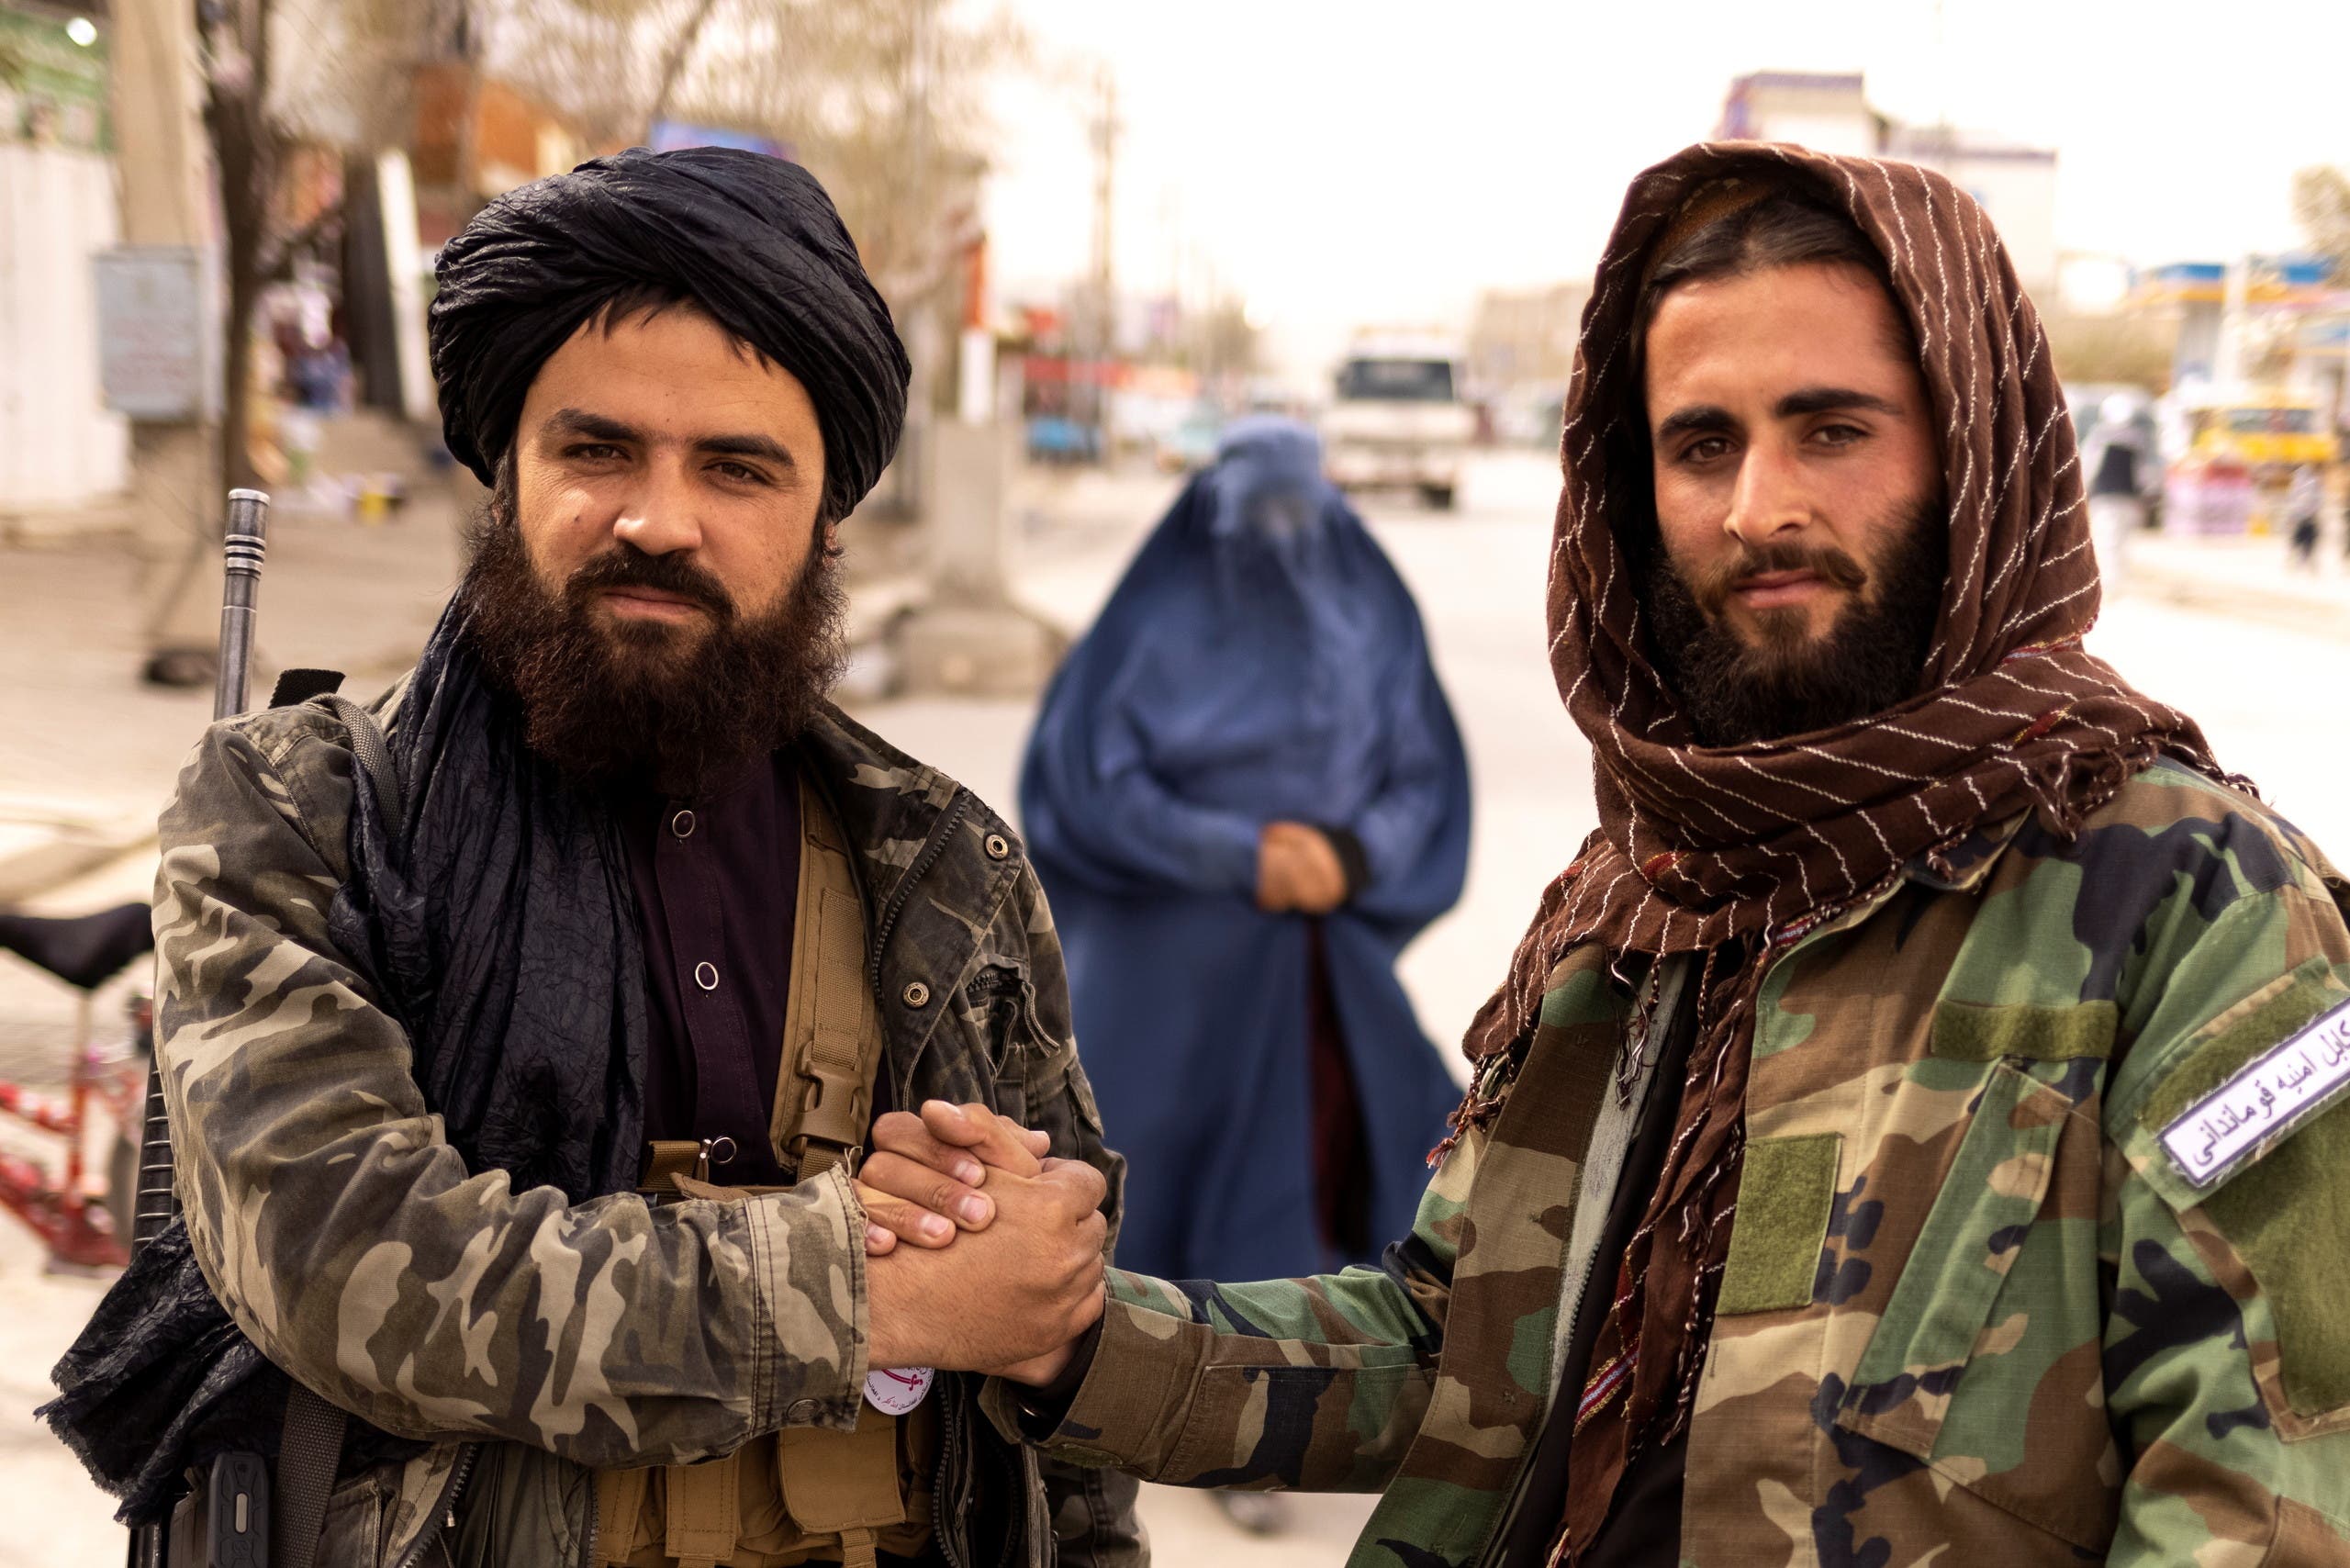 Two Taliban fighters in Kabul last October, with a woman wearing a burqa behind them